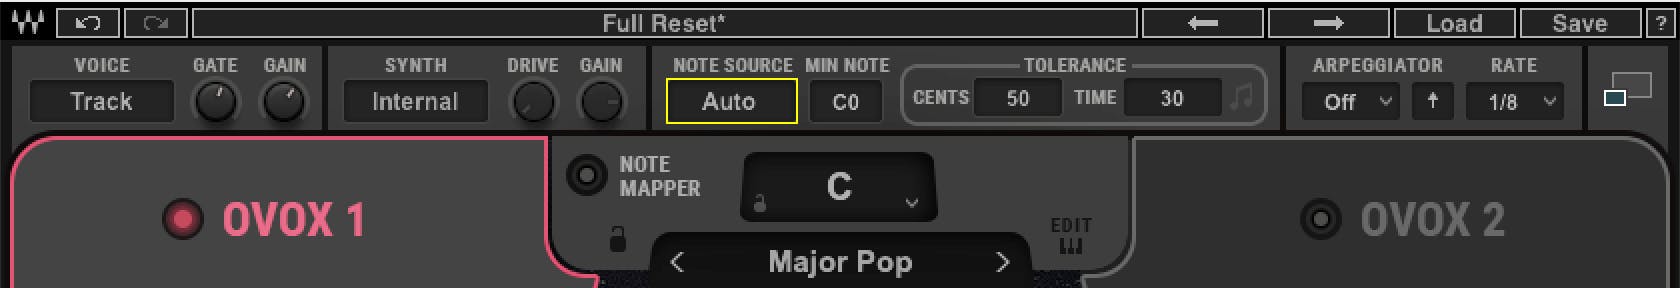 Inside OVox, make sure ‘Note Source’ is set to Auto or MIDI